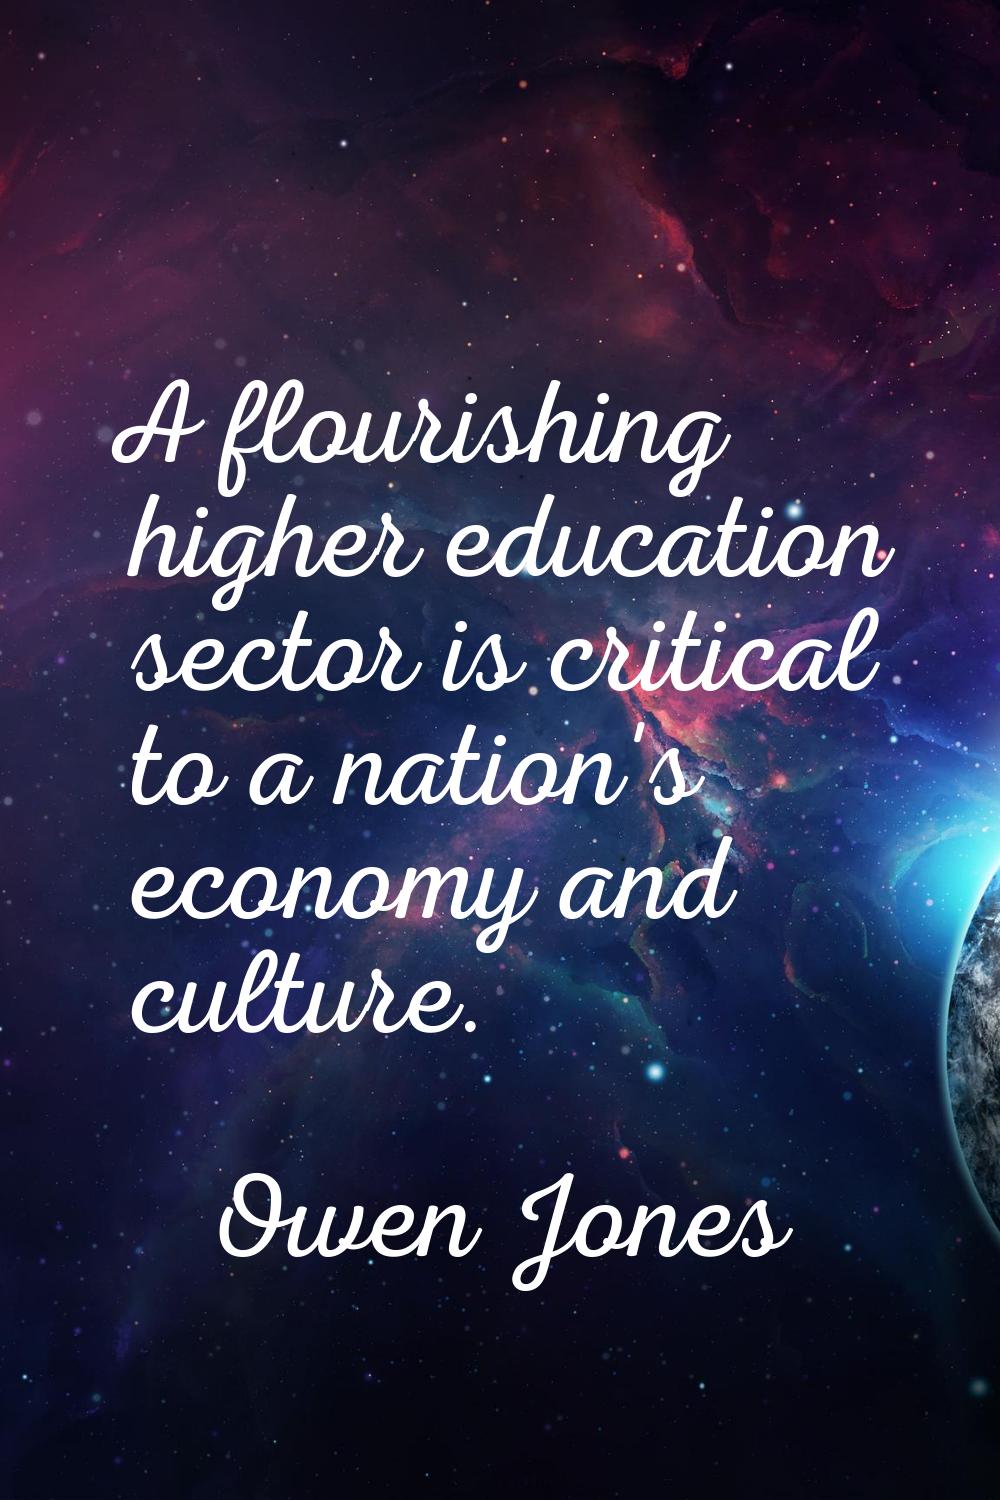 A flourishing higher education sector is critical to a nation's economy and culture.